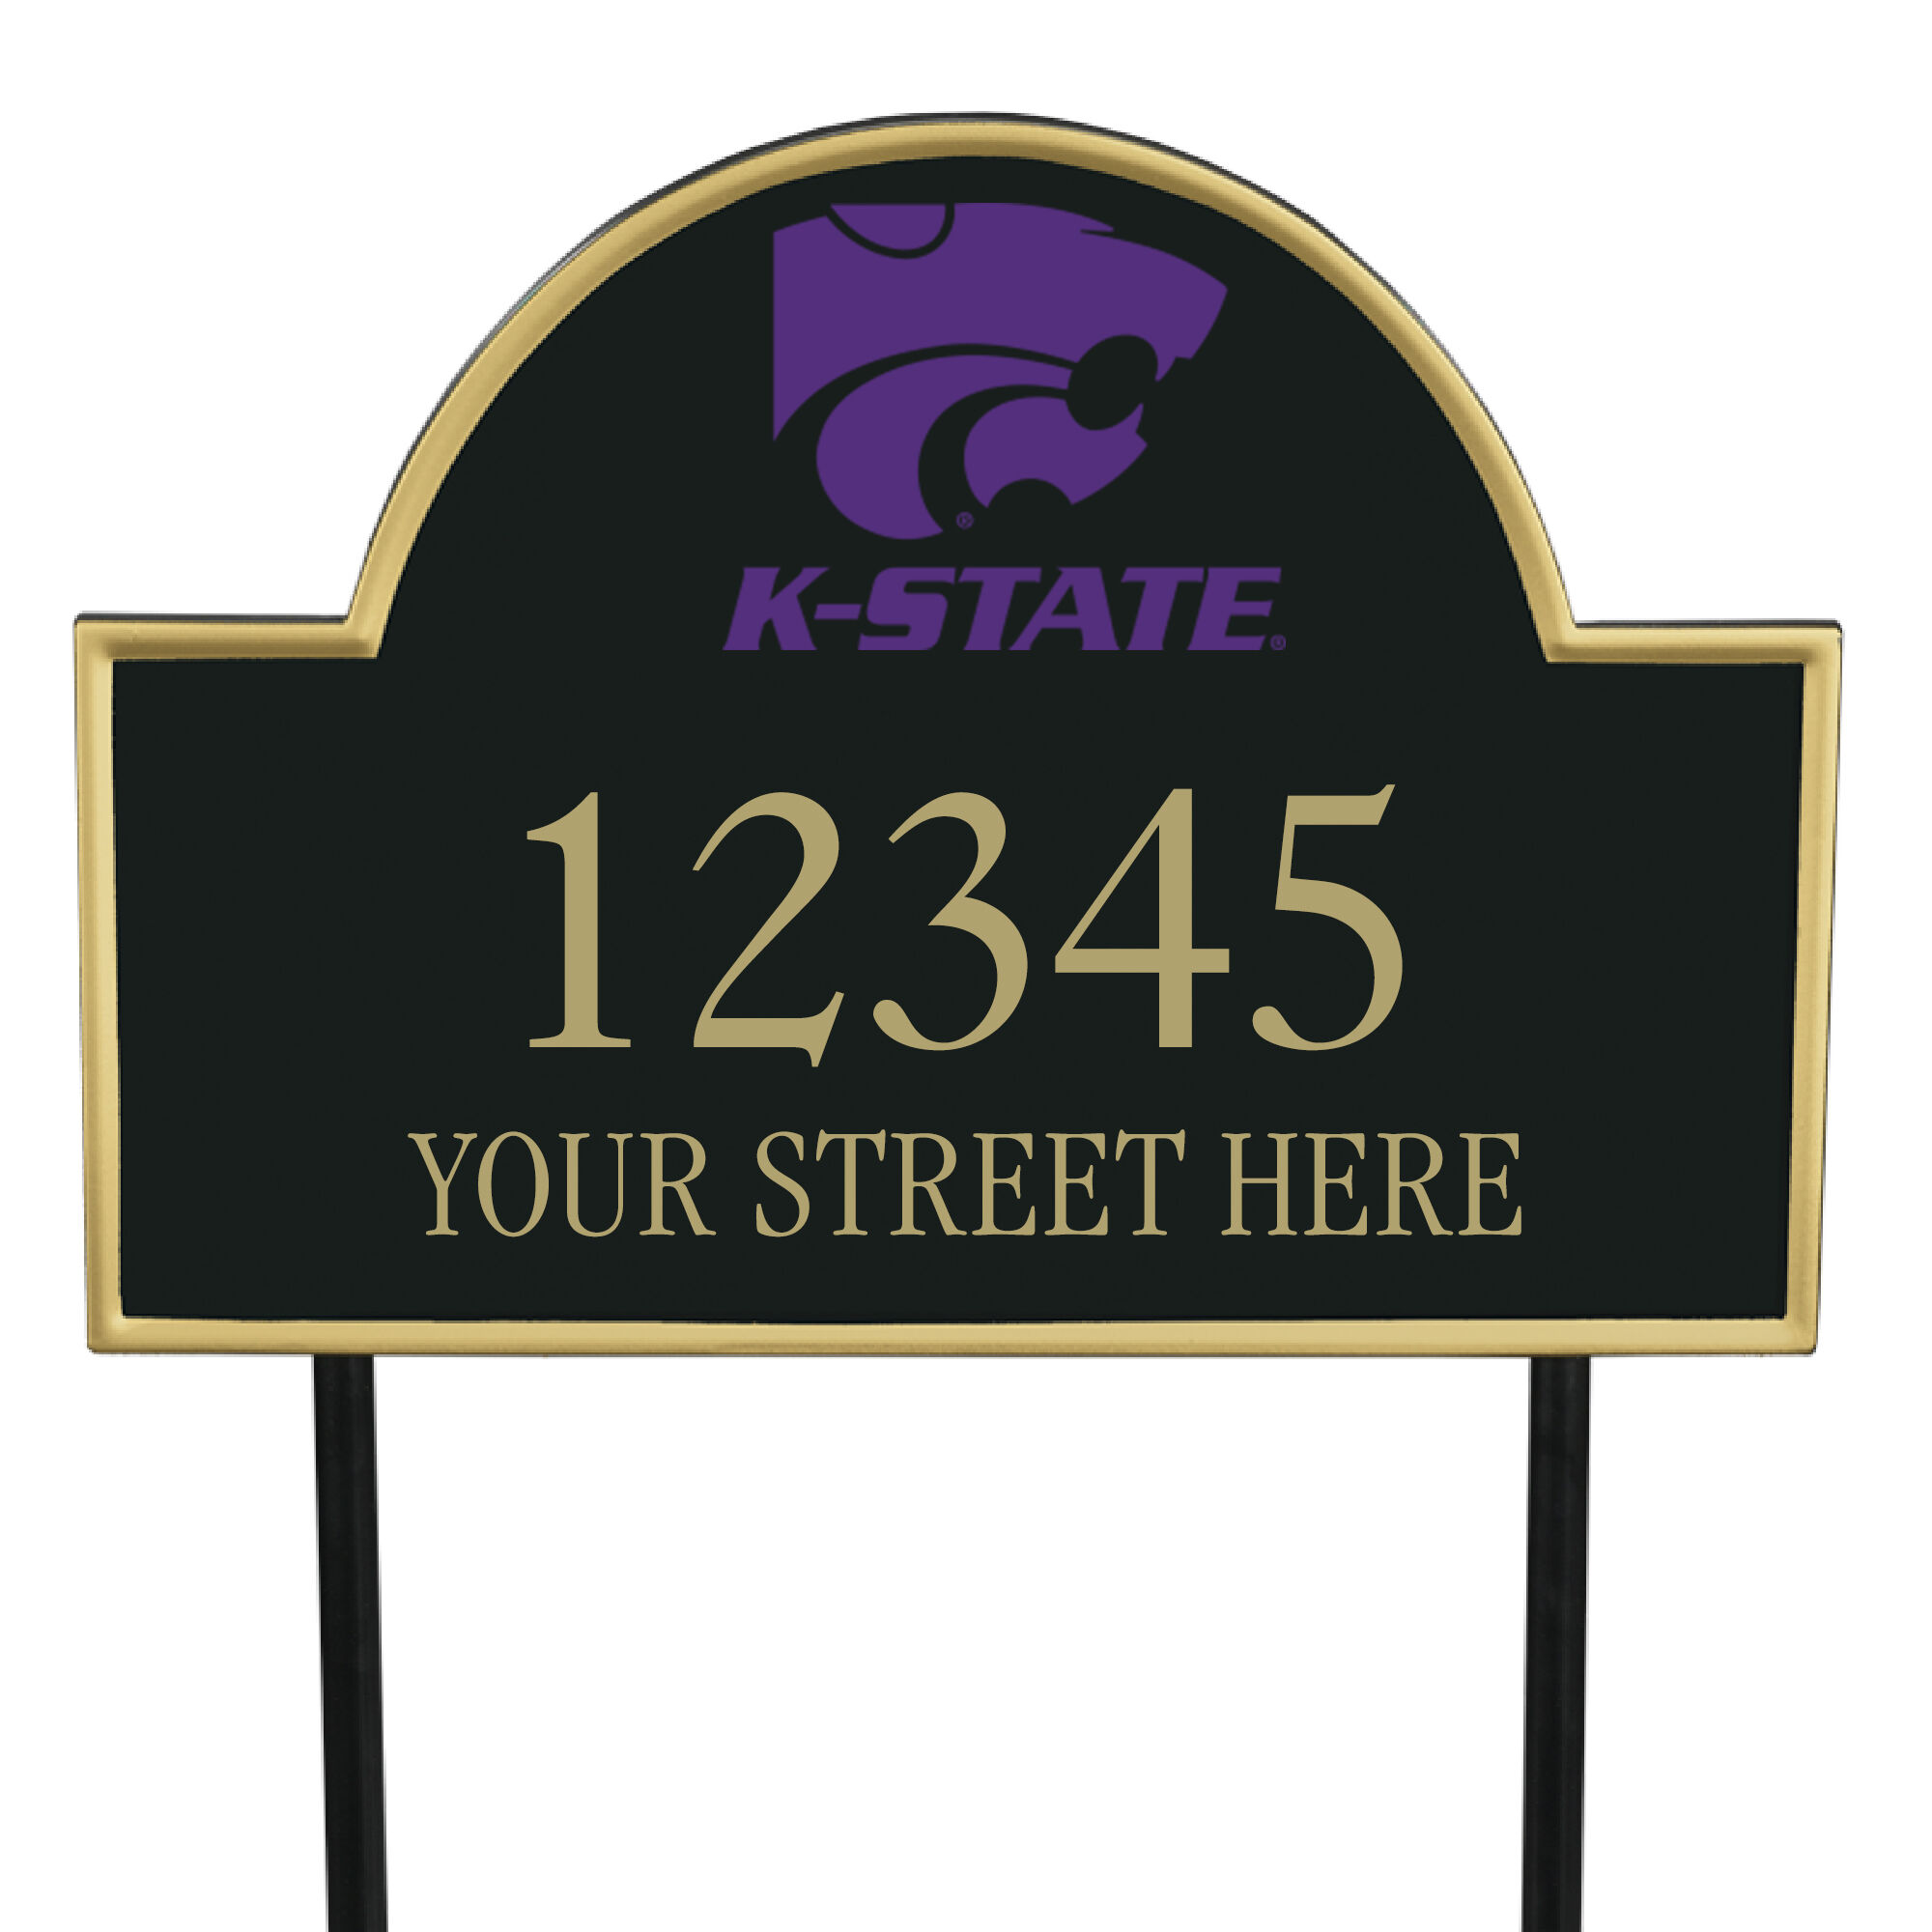 The College Personalized Address Plaque 5716 0384 b Kansas State